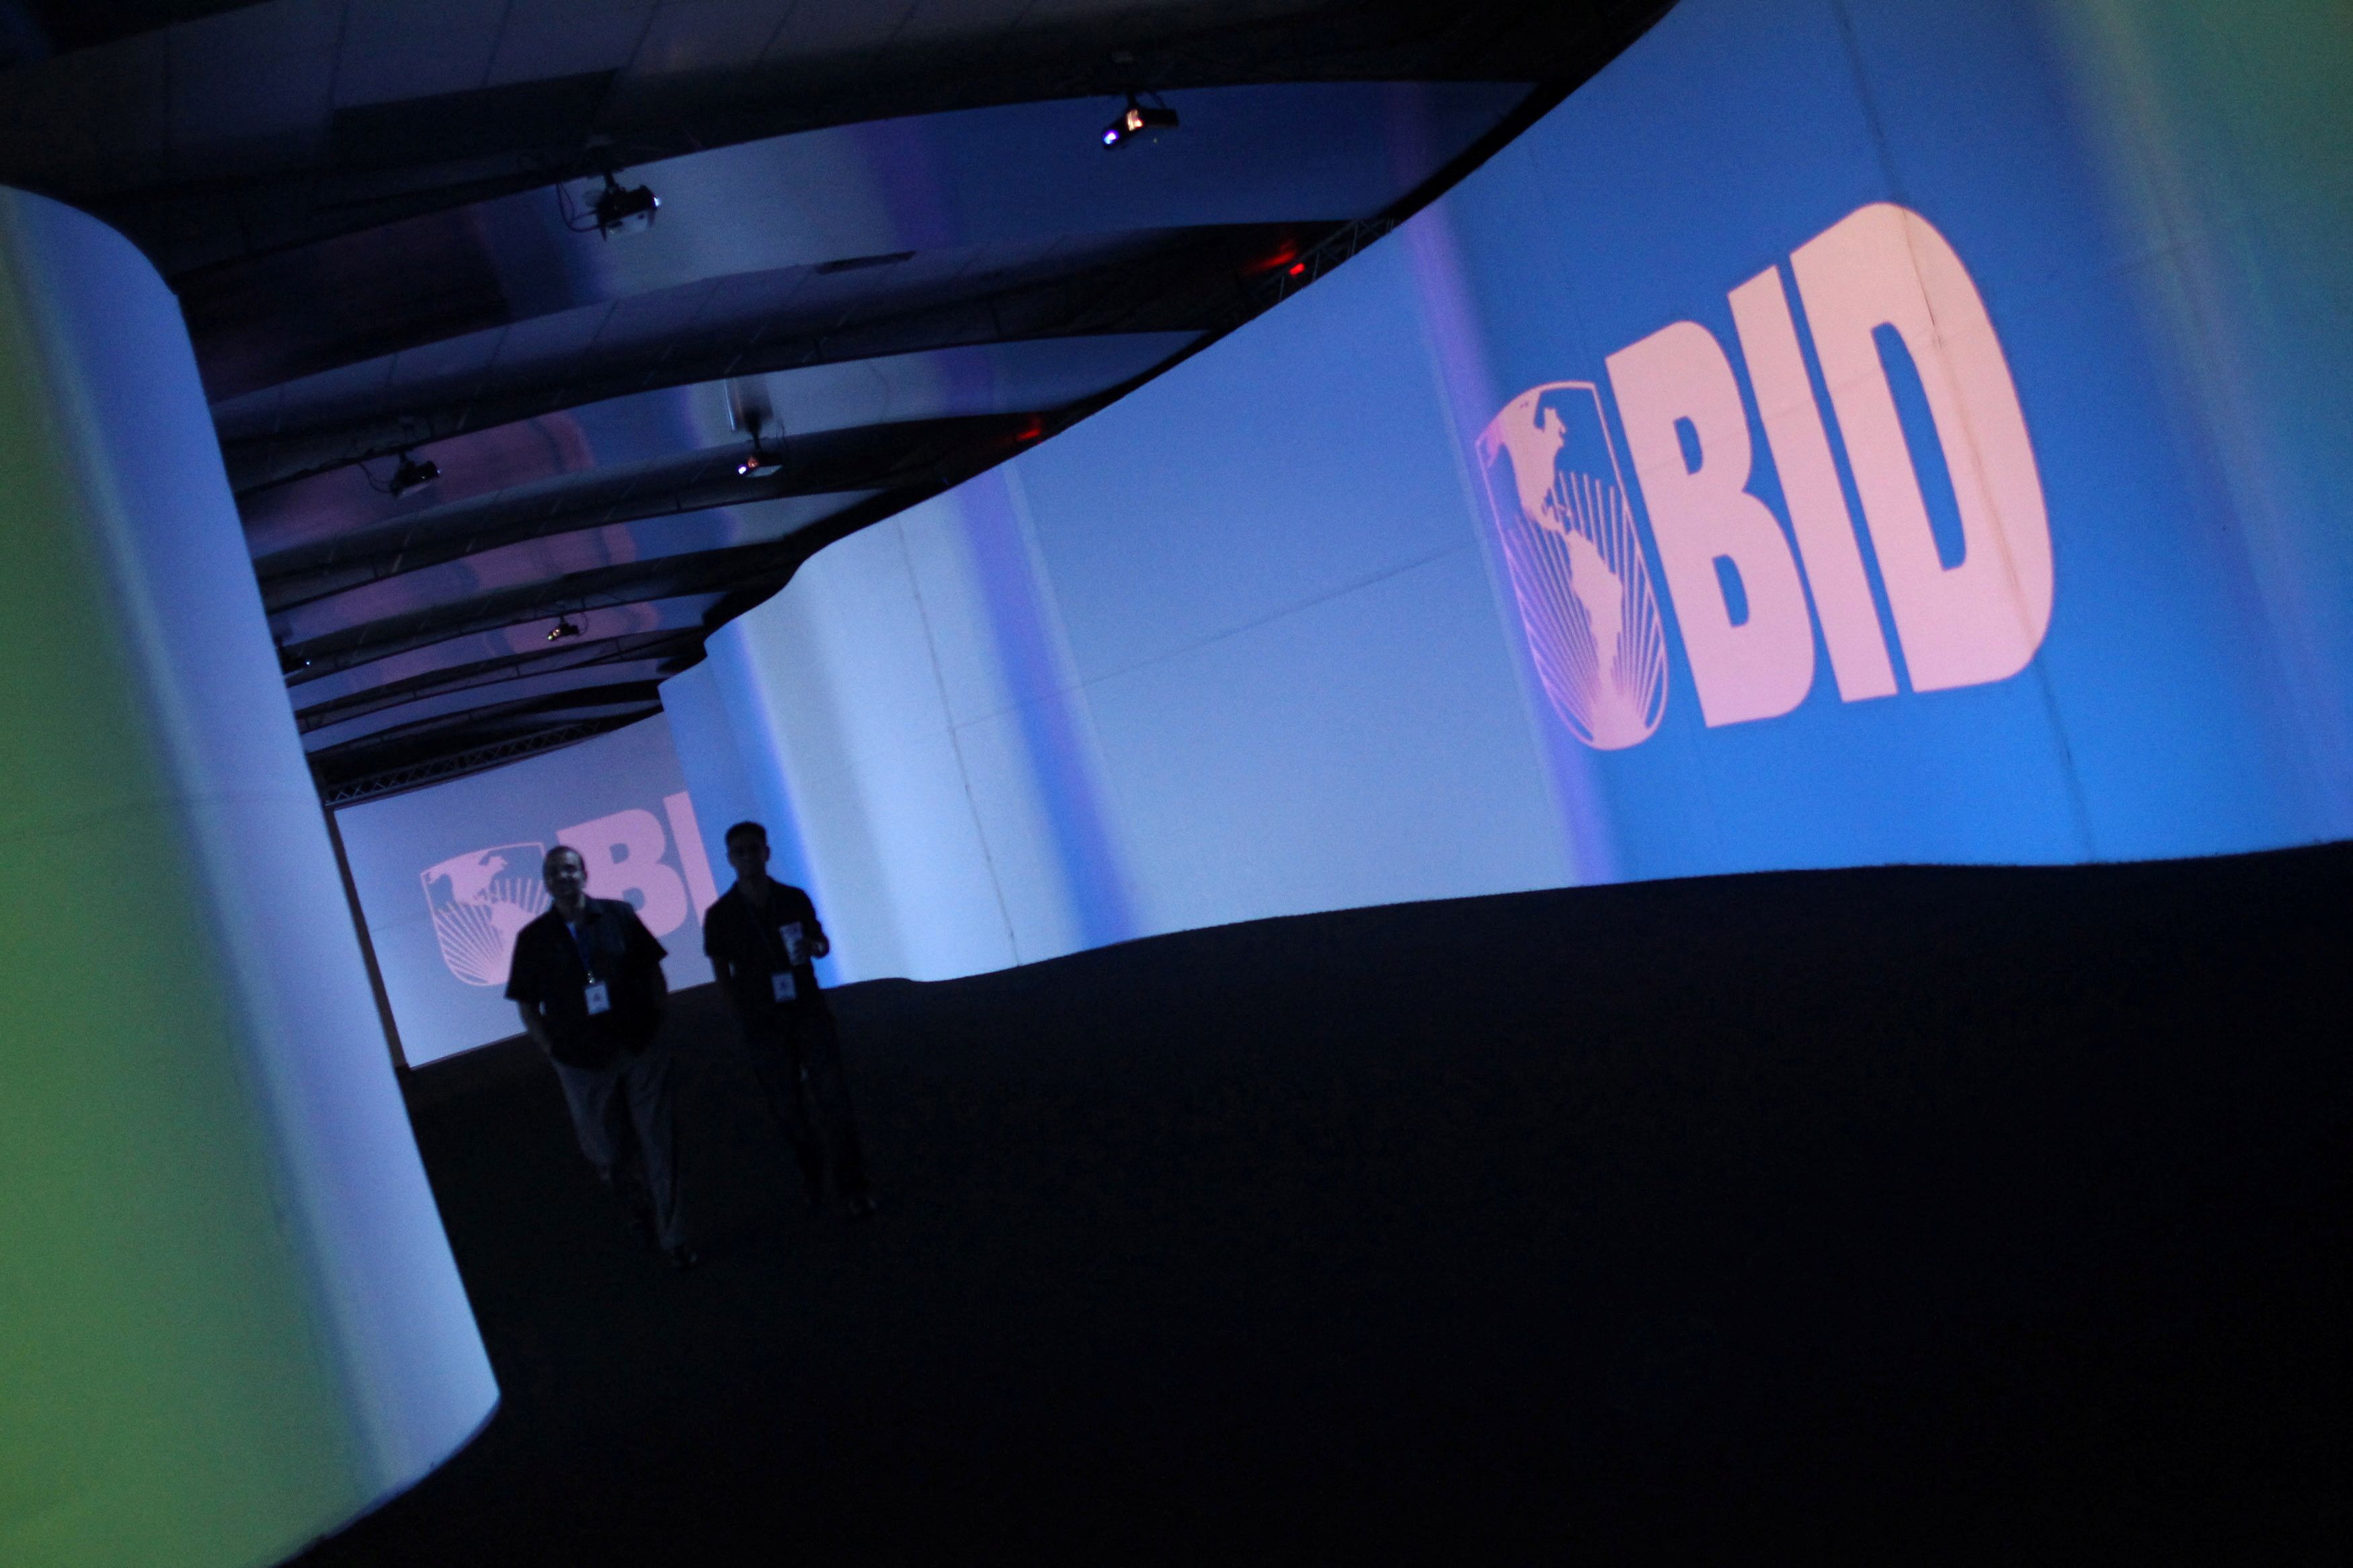 FILE PHOTO: FILE PHOTO: Visitors walk past a screen with the logo of Banco Interamericano de Desarrollo (BID) at the Atlapa Convention Center in Panama City March 13, 2013. Panama will be holding the annual meeting for Boards of Governors of BID, also known as the Inter-American Development Bank (IDB), from March 14 to 17. REUTERS/Carlos Jasso (PANAMA - Tags: BUSINESS LOGO)/File Photo/File Photo